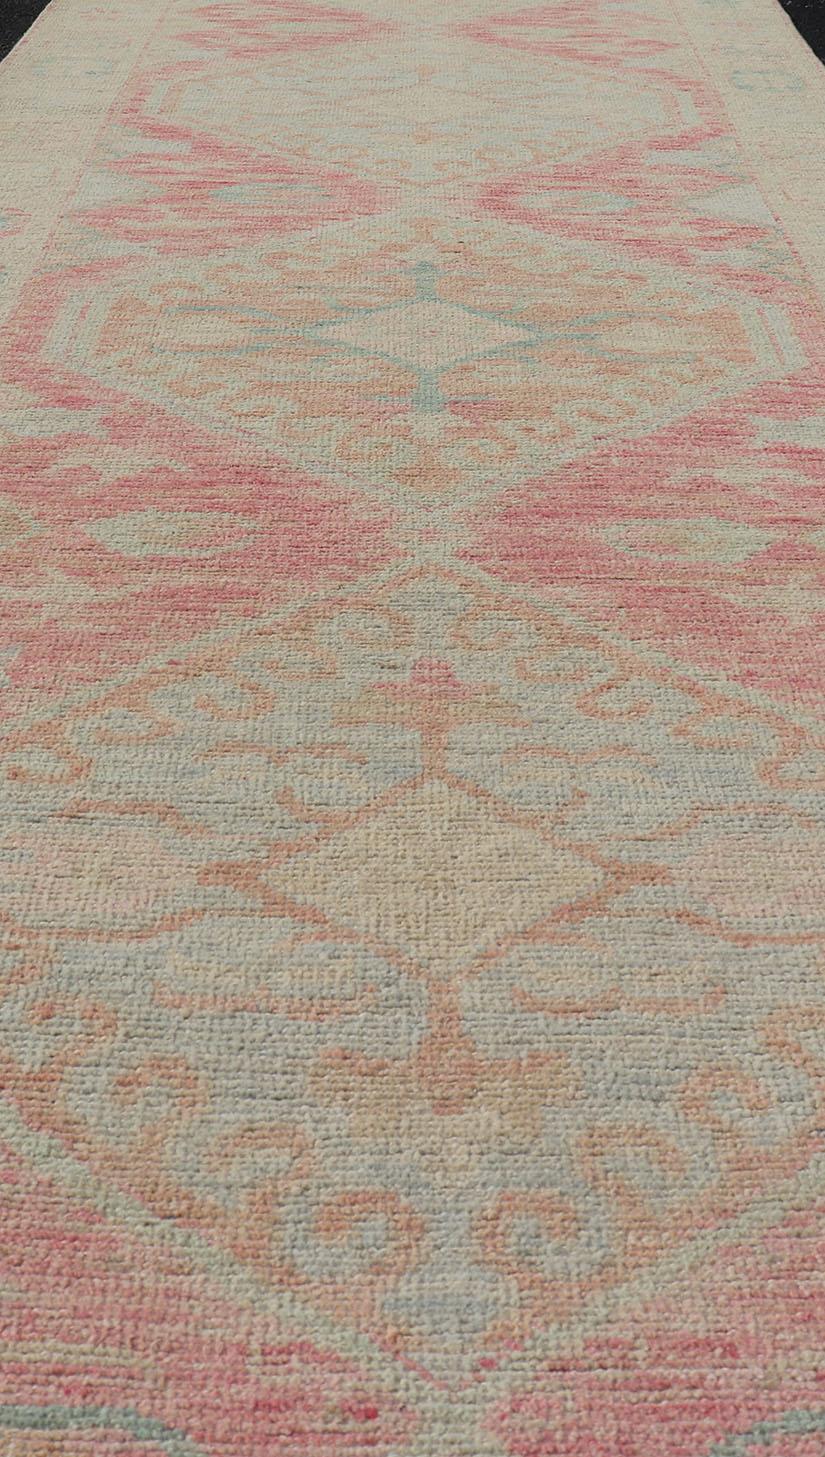 Modern Hand Knotted Oushak Runner With Medallions in Pink's and Creams. Keivan Woven Arts; AWR-4982 Country of Origin: Afghanistan Type: Oushak Design: Tribal,

Measures: 3'0 x 12'9

This long Oushak runner has a light pink background with a cream